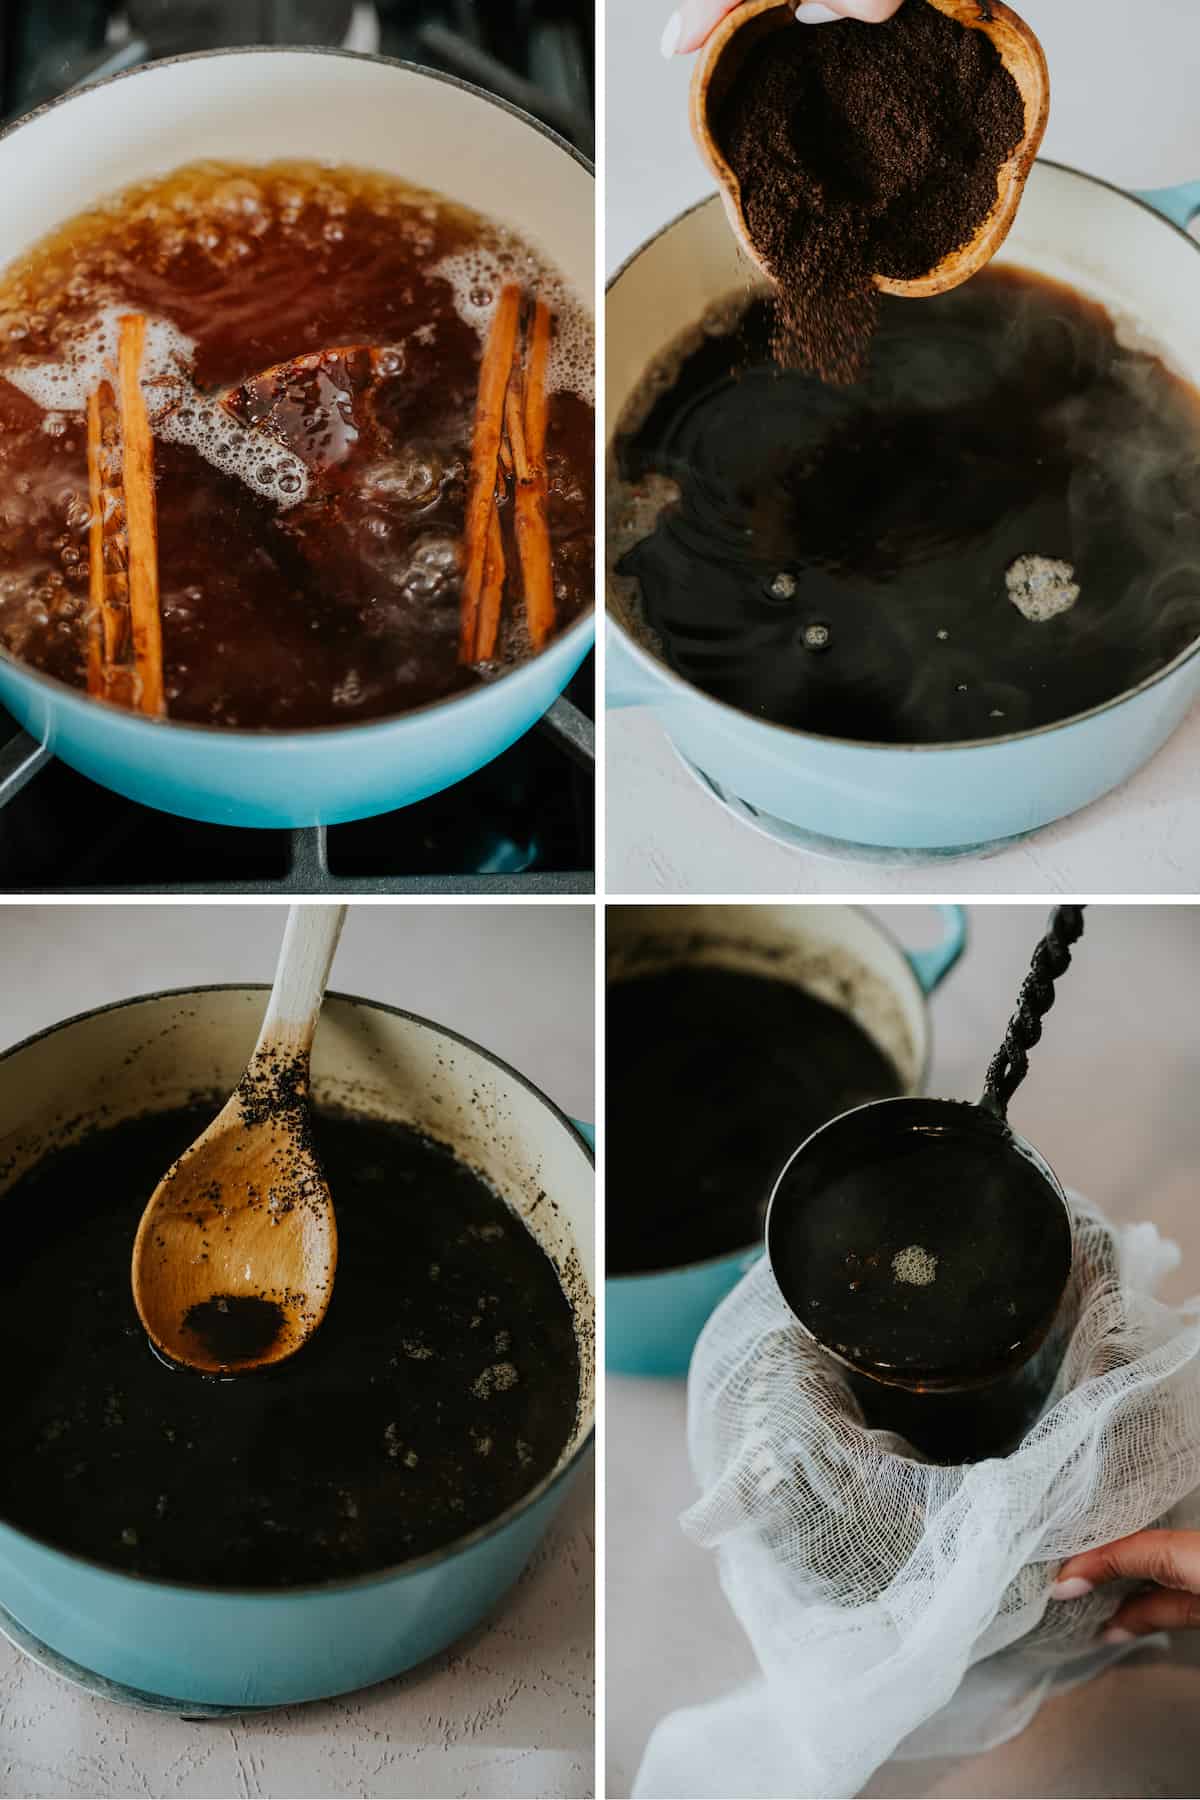 grid-style photo collage showing the process of making cafe de olla in a turquoise dutch oven — simmering the piloncillo and spices in water, adding the coffee grounds, simmering, and then straining the mixture through cheesecloth. 